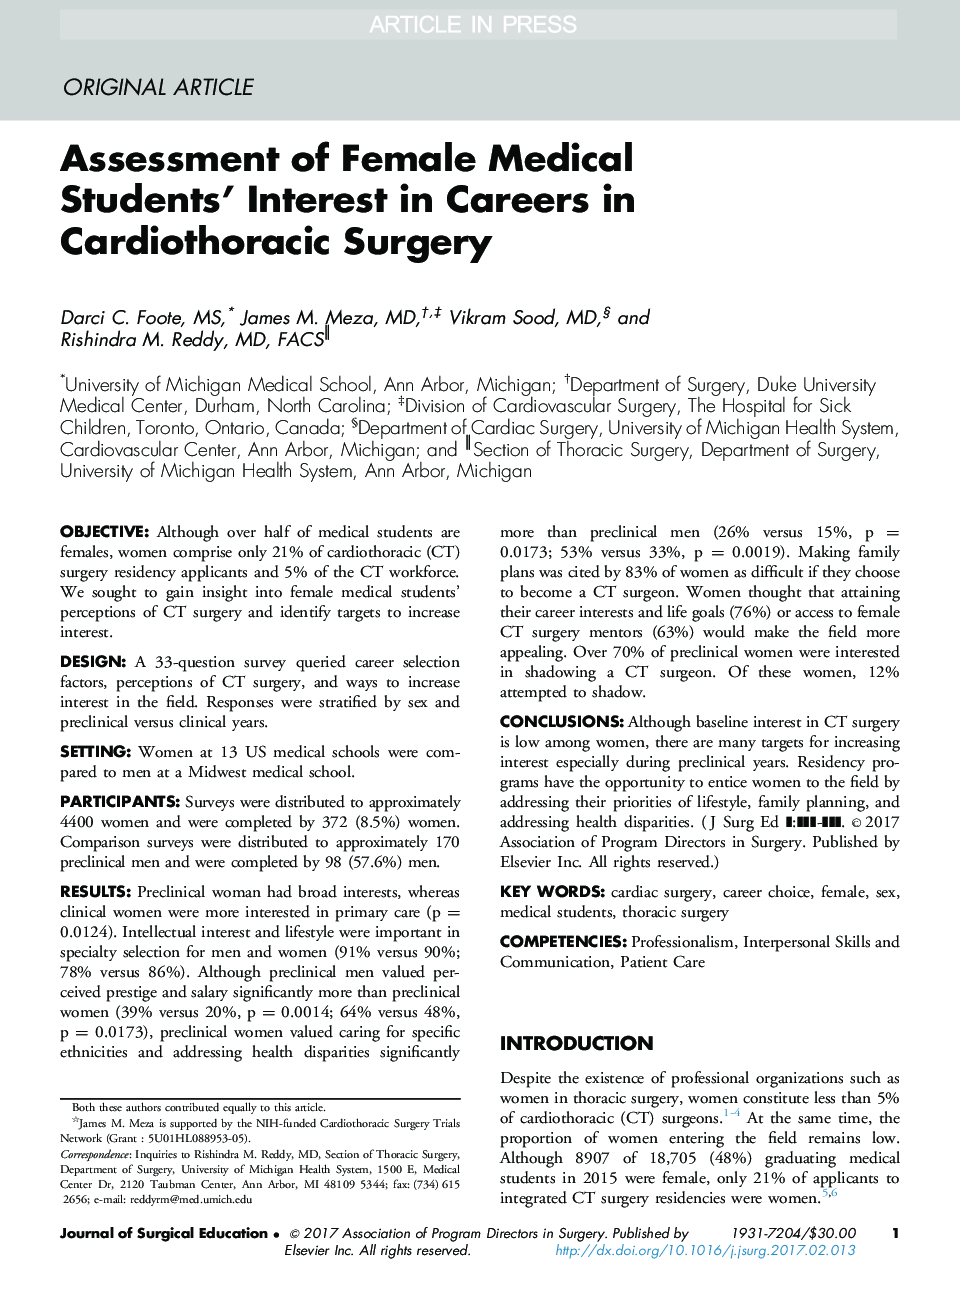 Assessment of Female Medical Students' Interest in Careers in Cardiothoracic Surgery